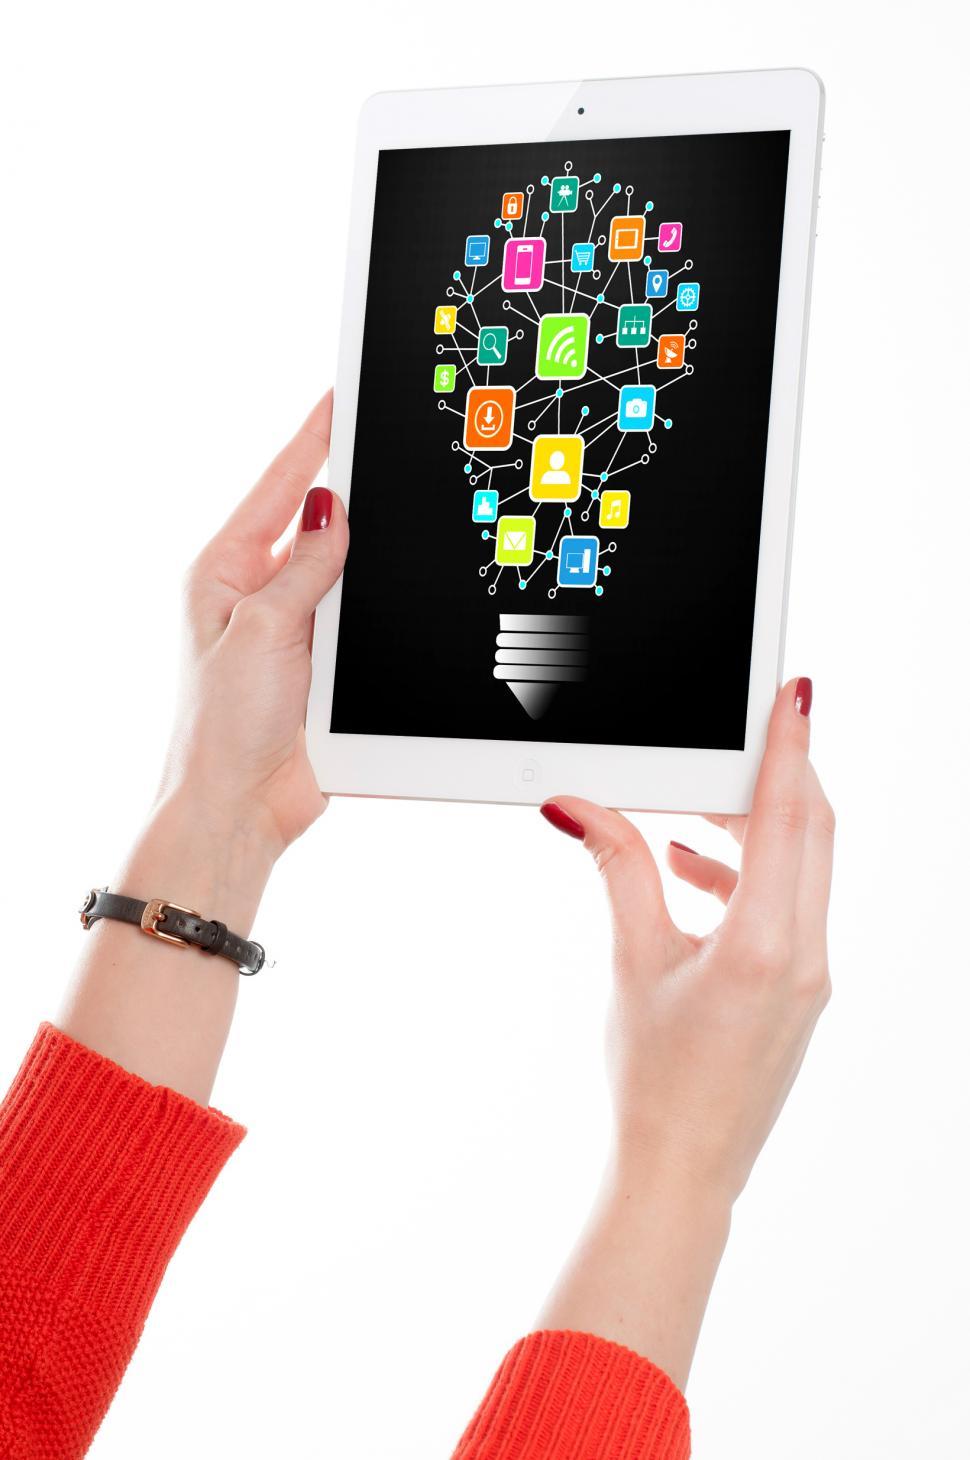 Free Image of Information Technology Idea on Tablet 